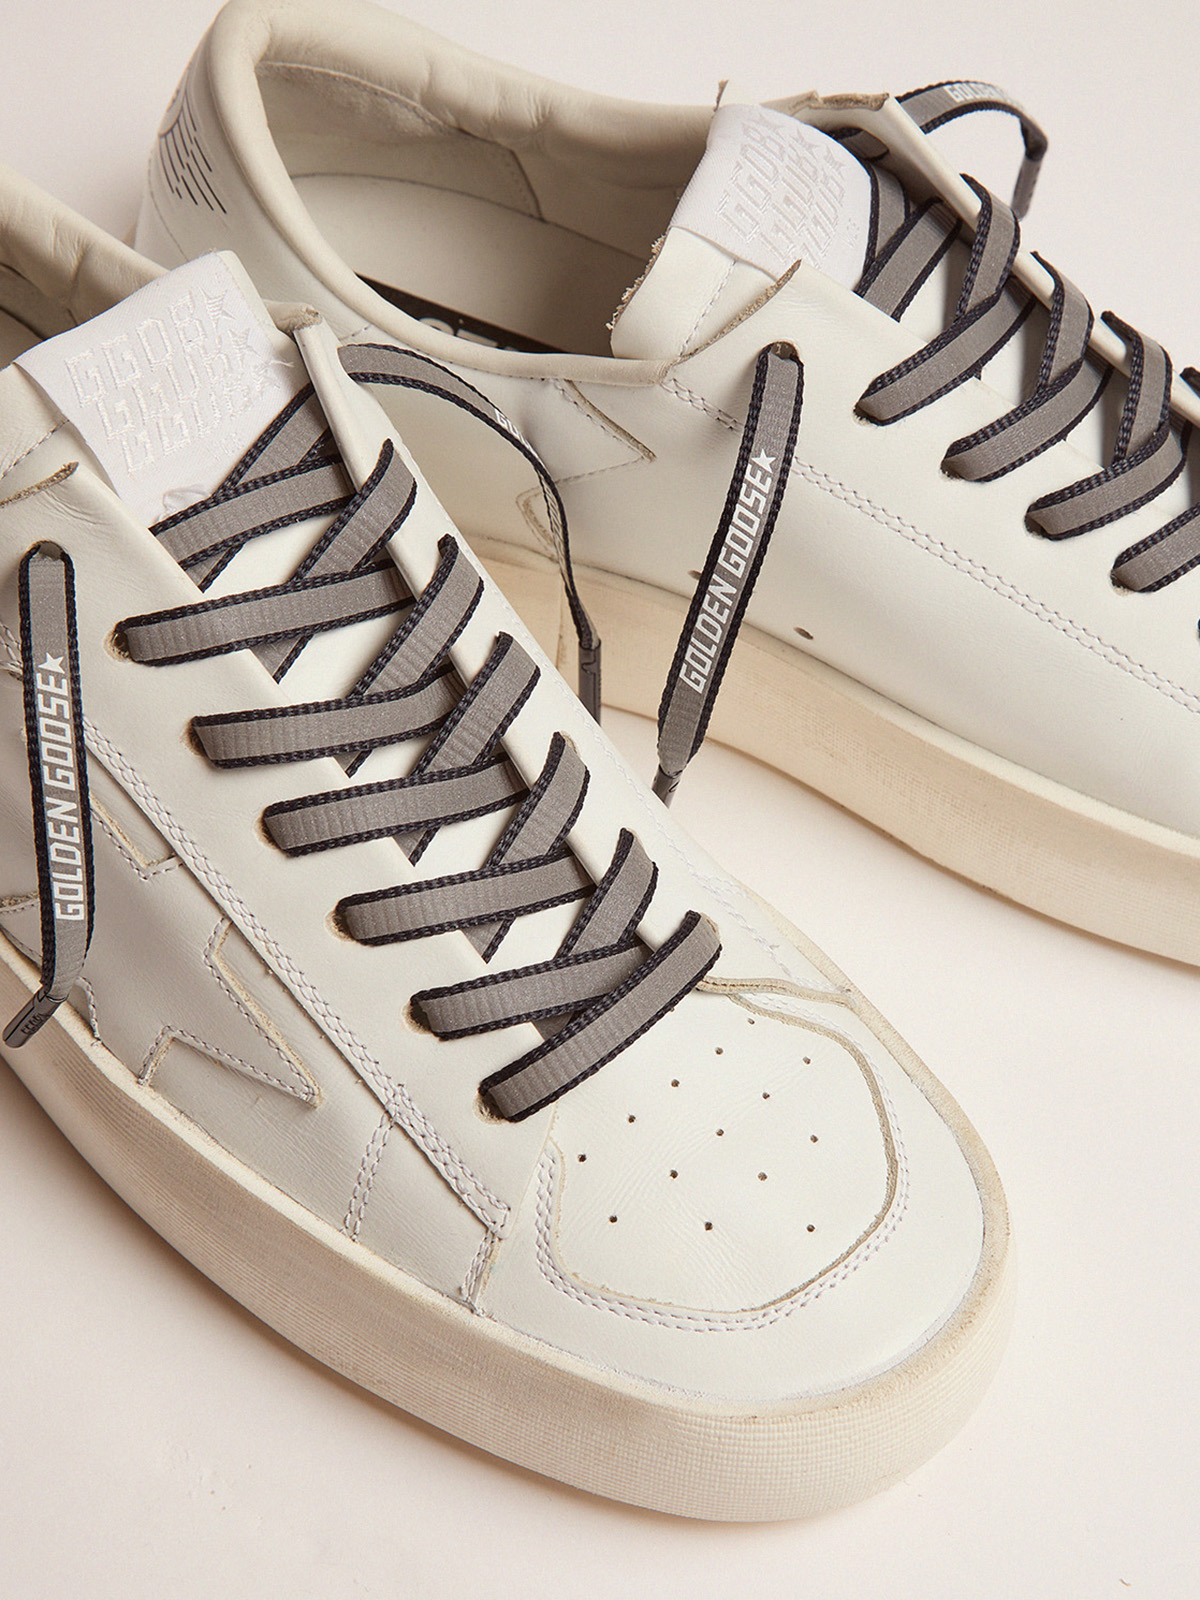 Women's blue reflective laces with logo | Golden Goose